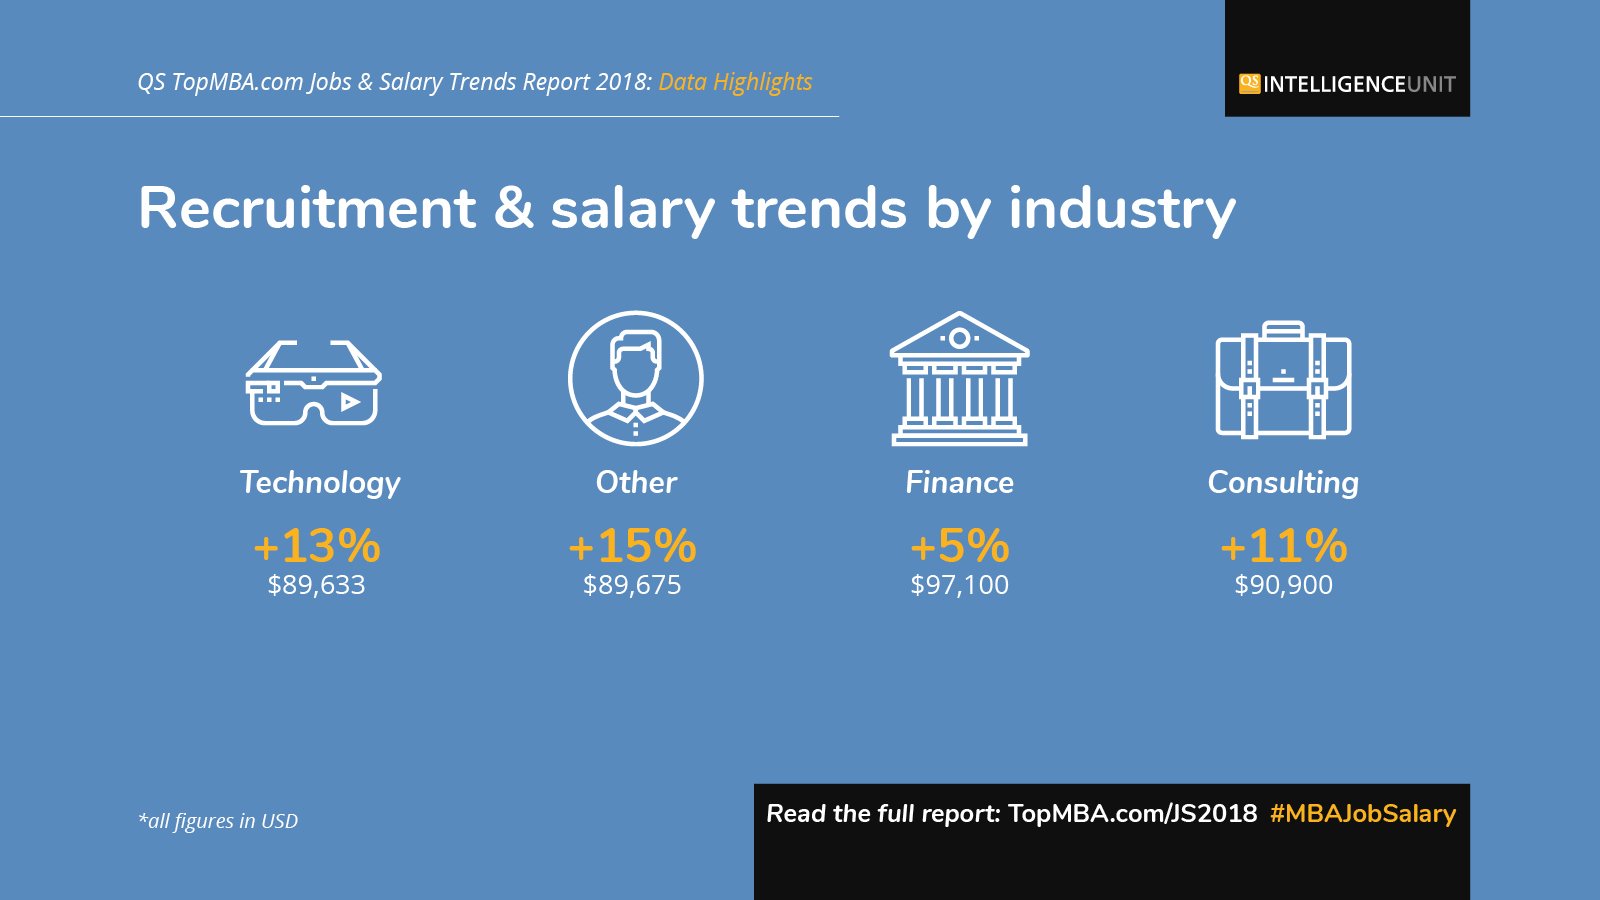 Recruitment & Salary Trends by Industry 2018